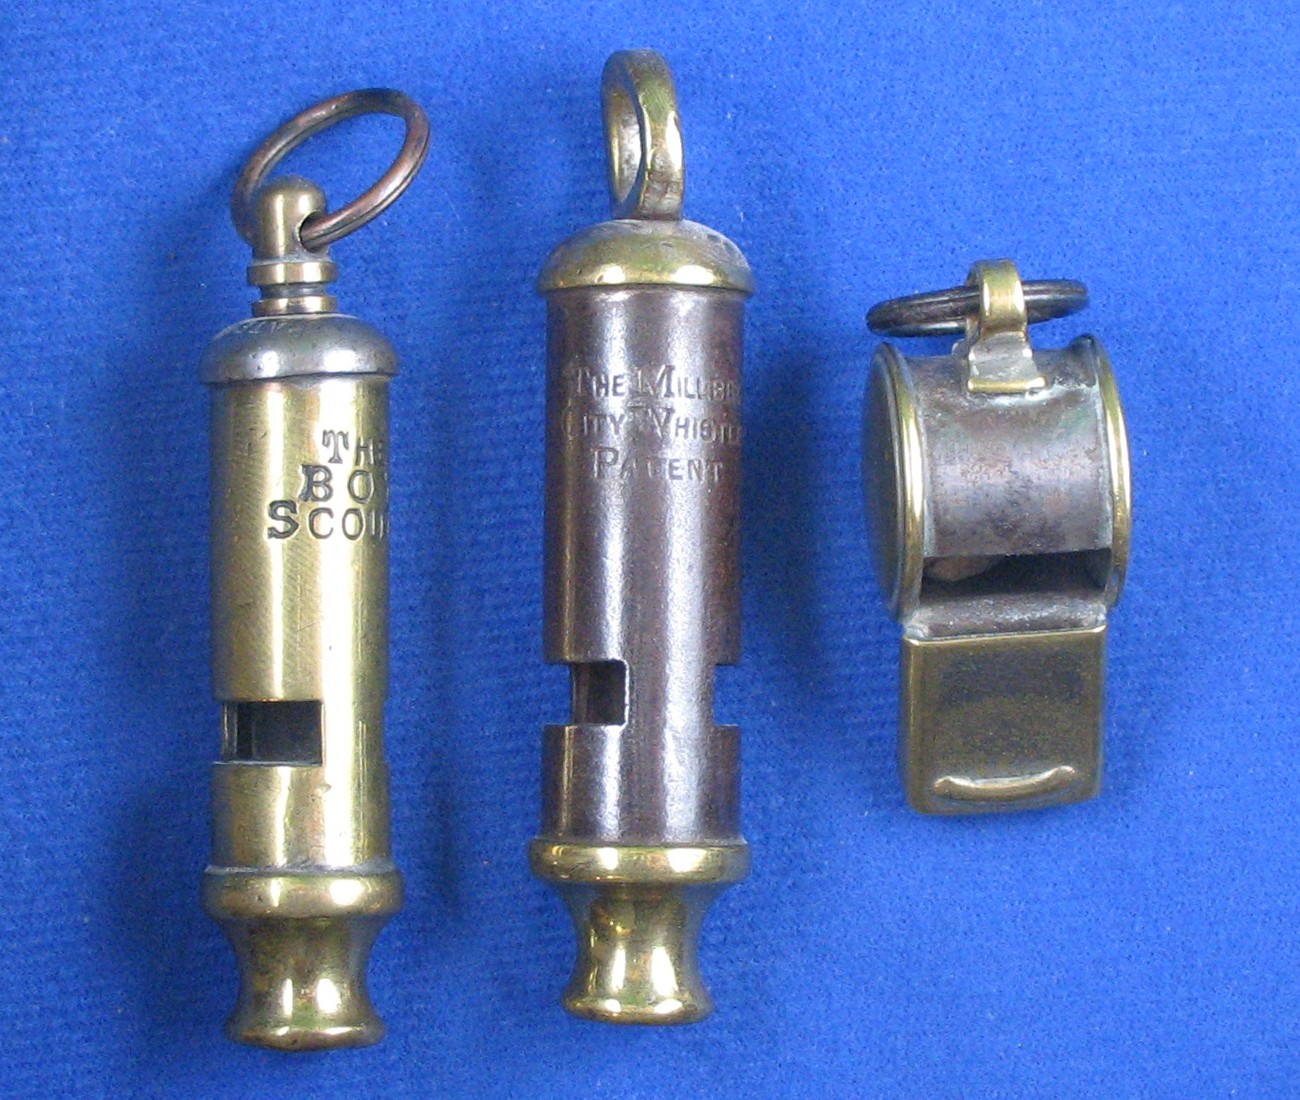 Steel and Brass Whistles